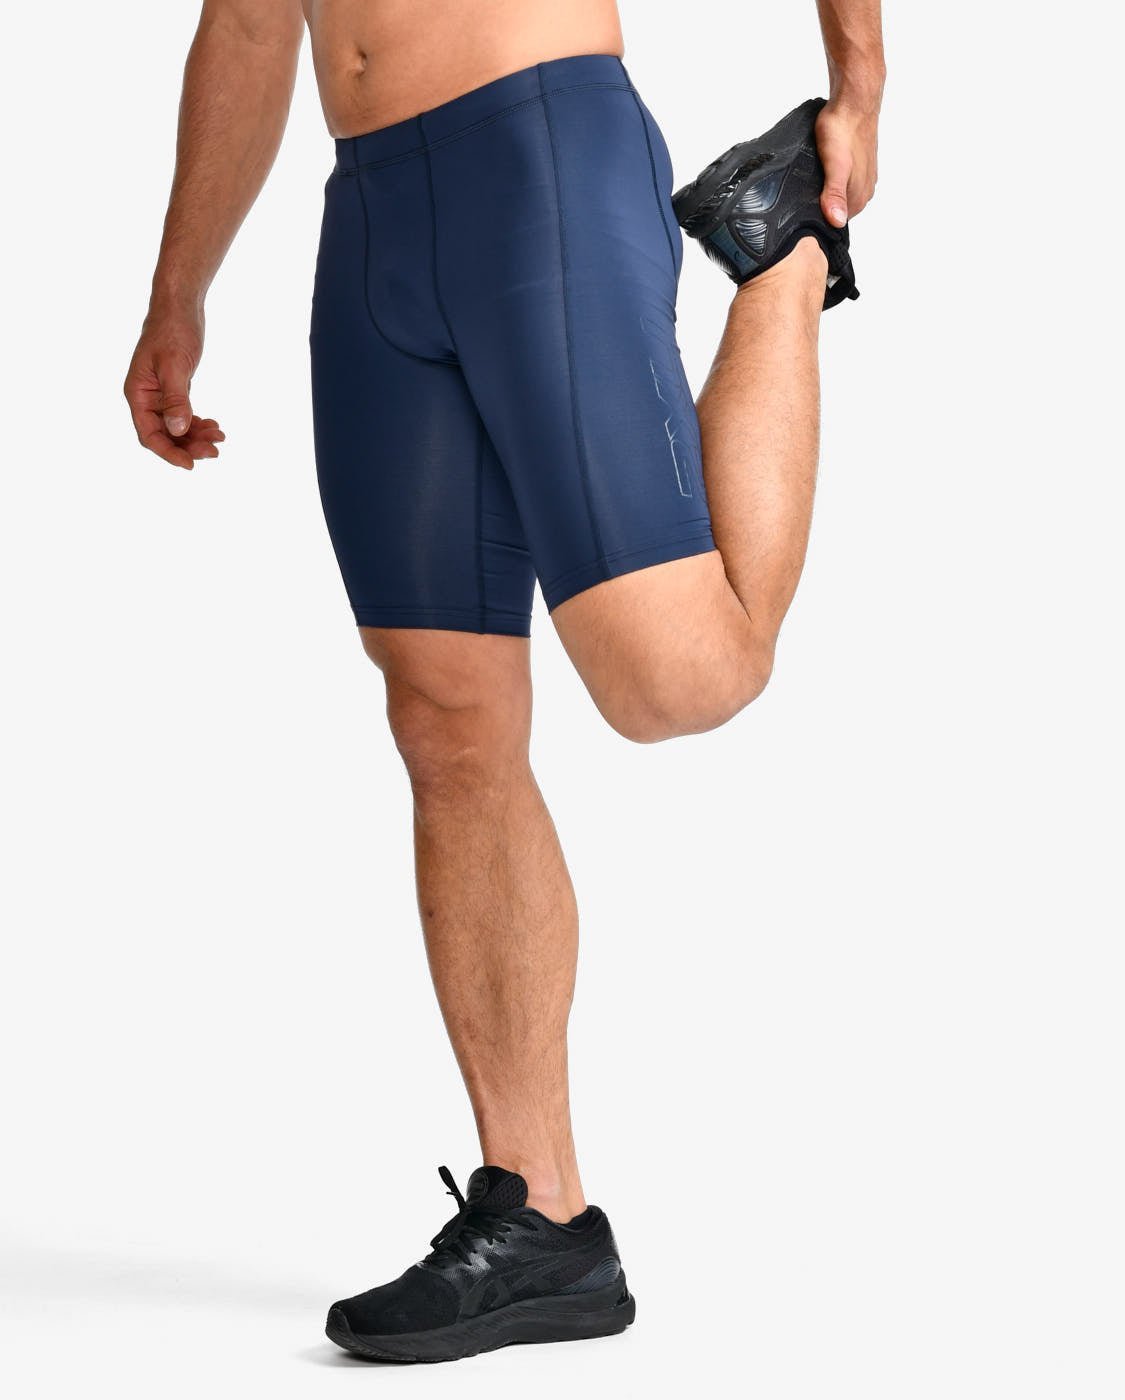 2XU South Africa - Men's Core Compression Shorts - Navy - Navy/Navy